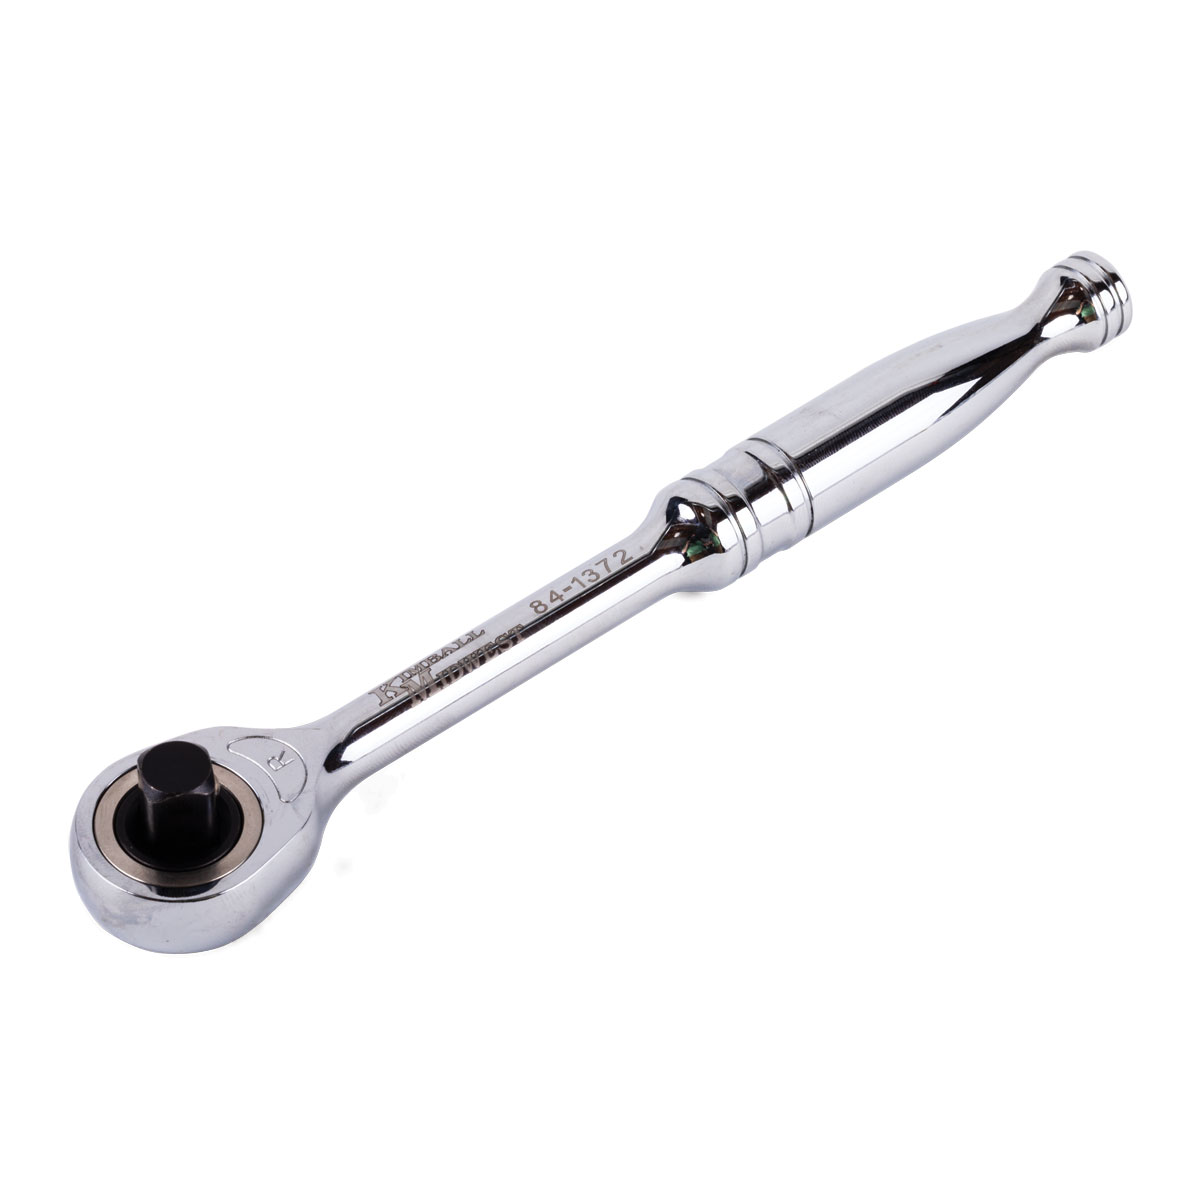 3/8" Gearless Ratchet Wrench